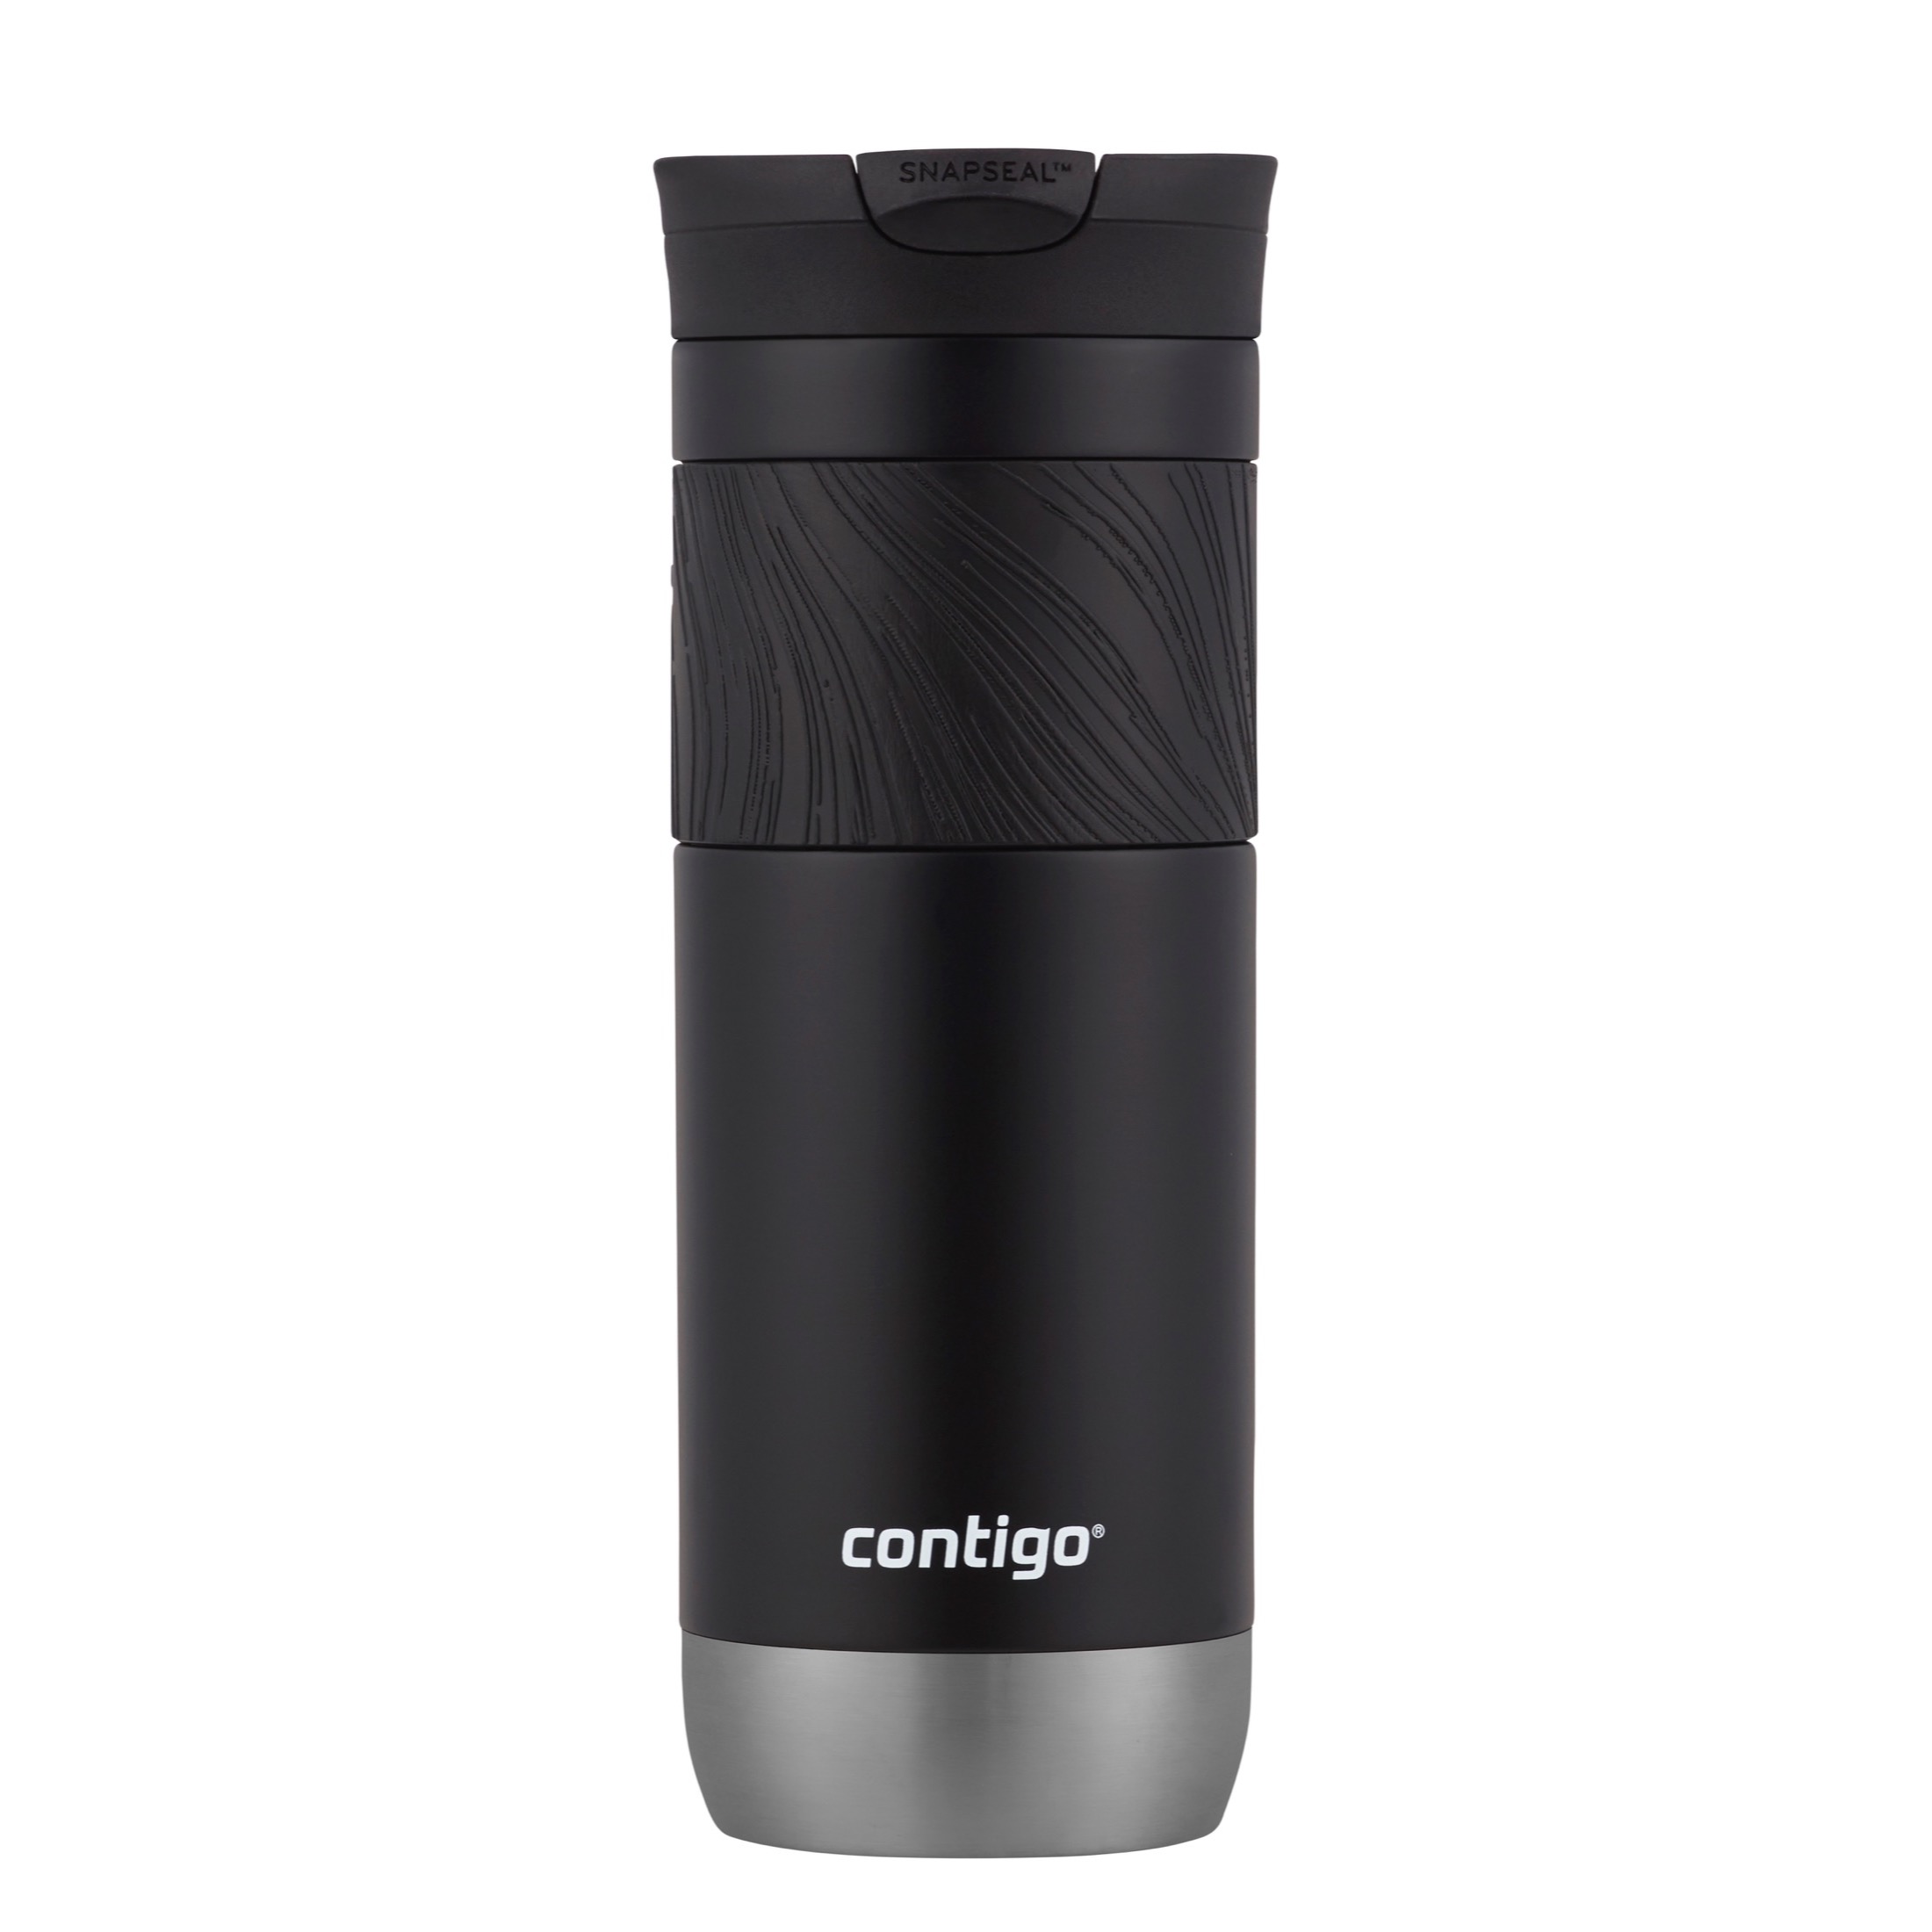 Contigo Byron 2.0 Stainless Steel Travel Mug with SNAPSEAL Lid in Black Licorice, 20 fl oz. - image 1 of 4